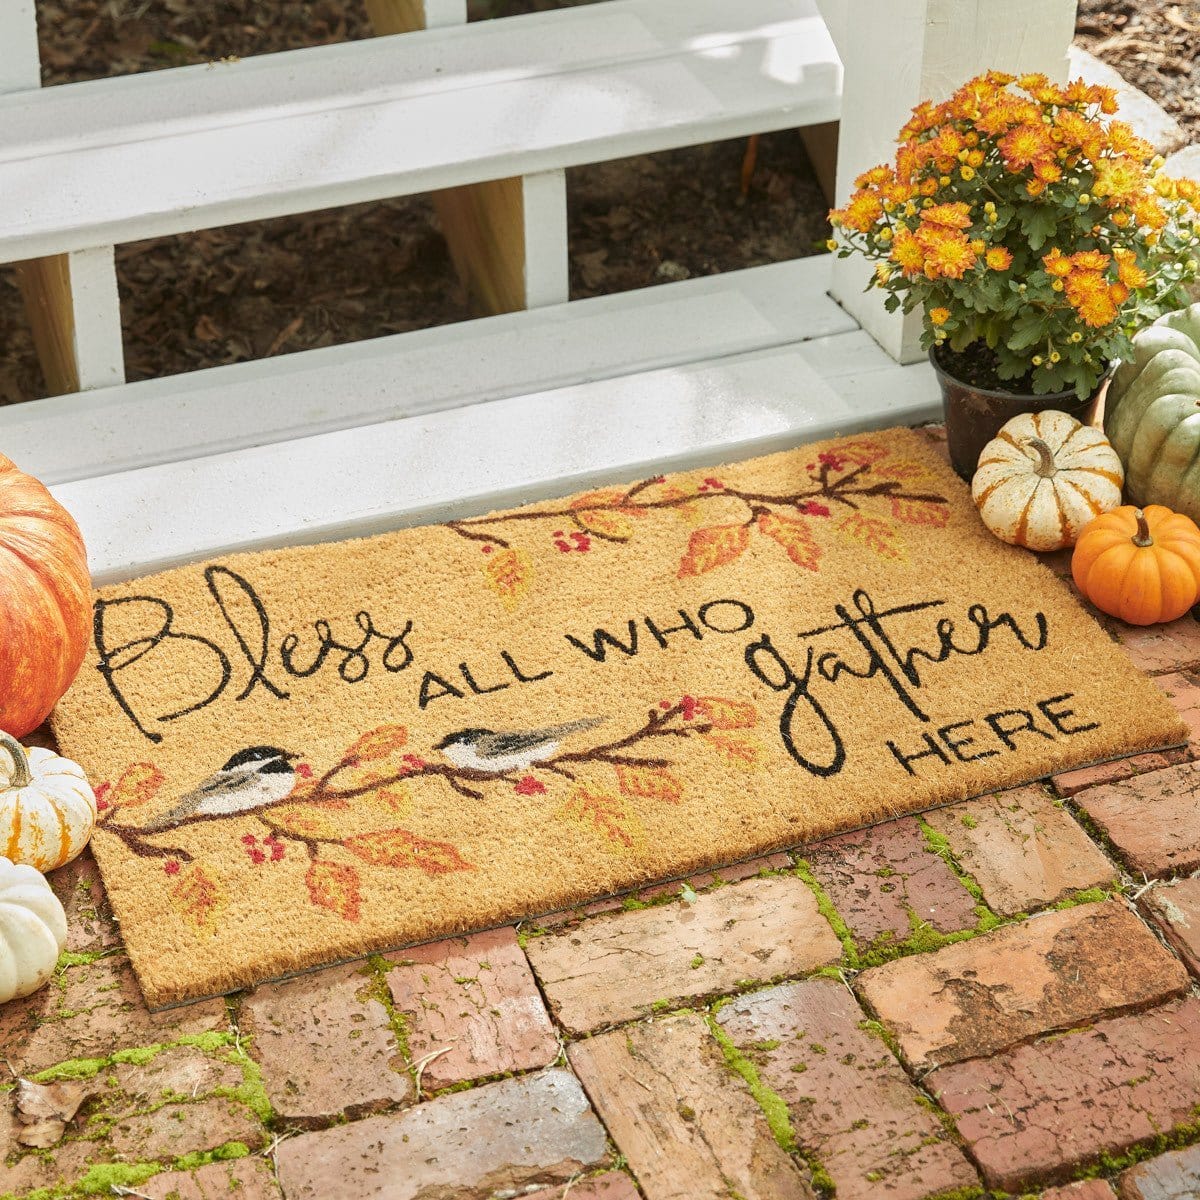 Fall Blessings Bless All Who Gather Here Doormat Rectangle-Park Designs-The Village Merchant